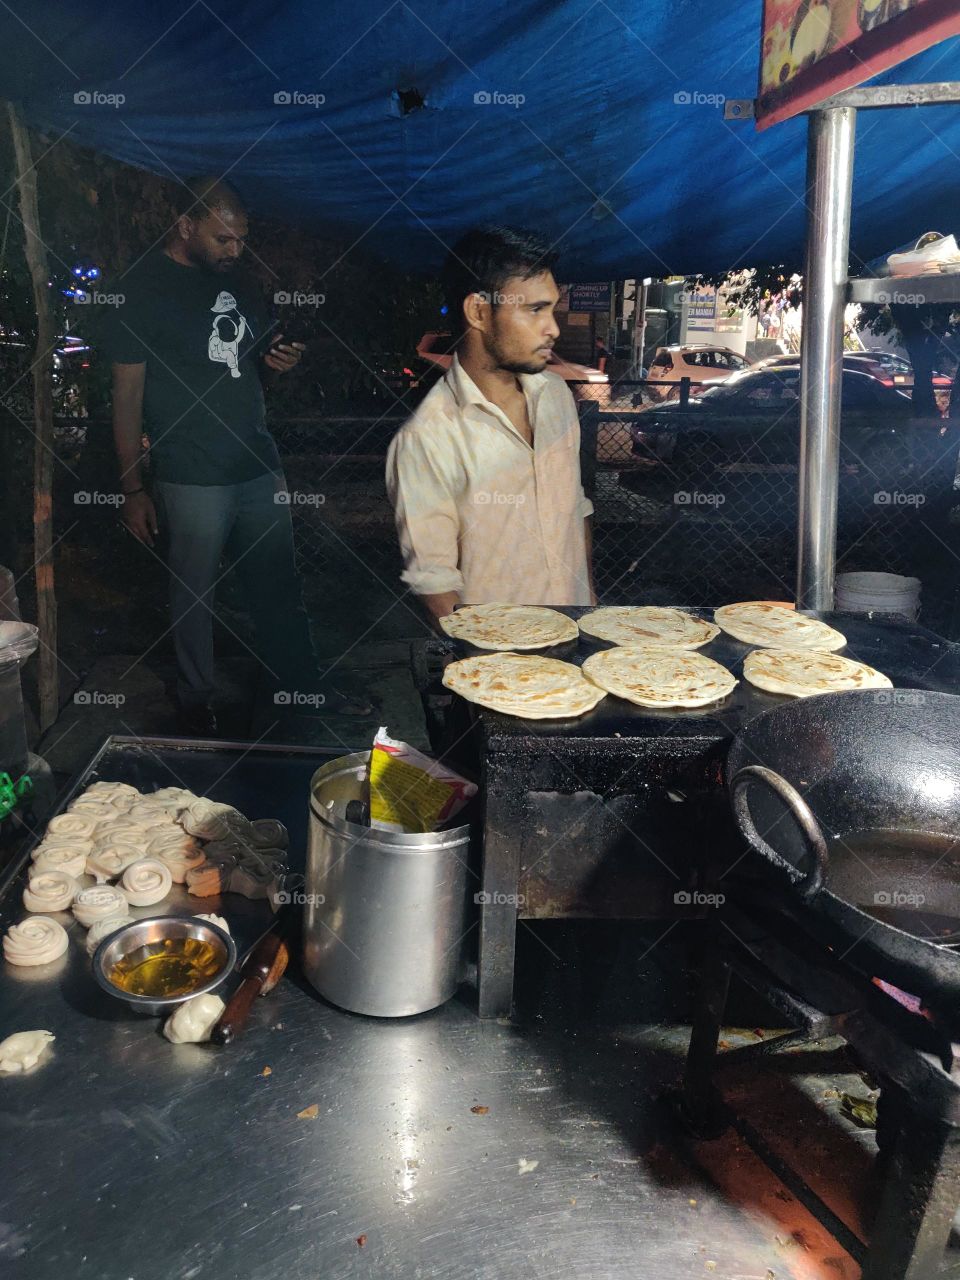 parotha from the streets of Bangalore,India